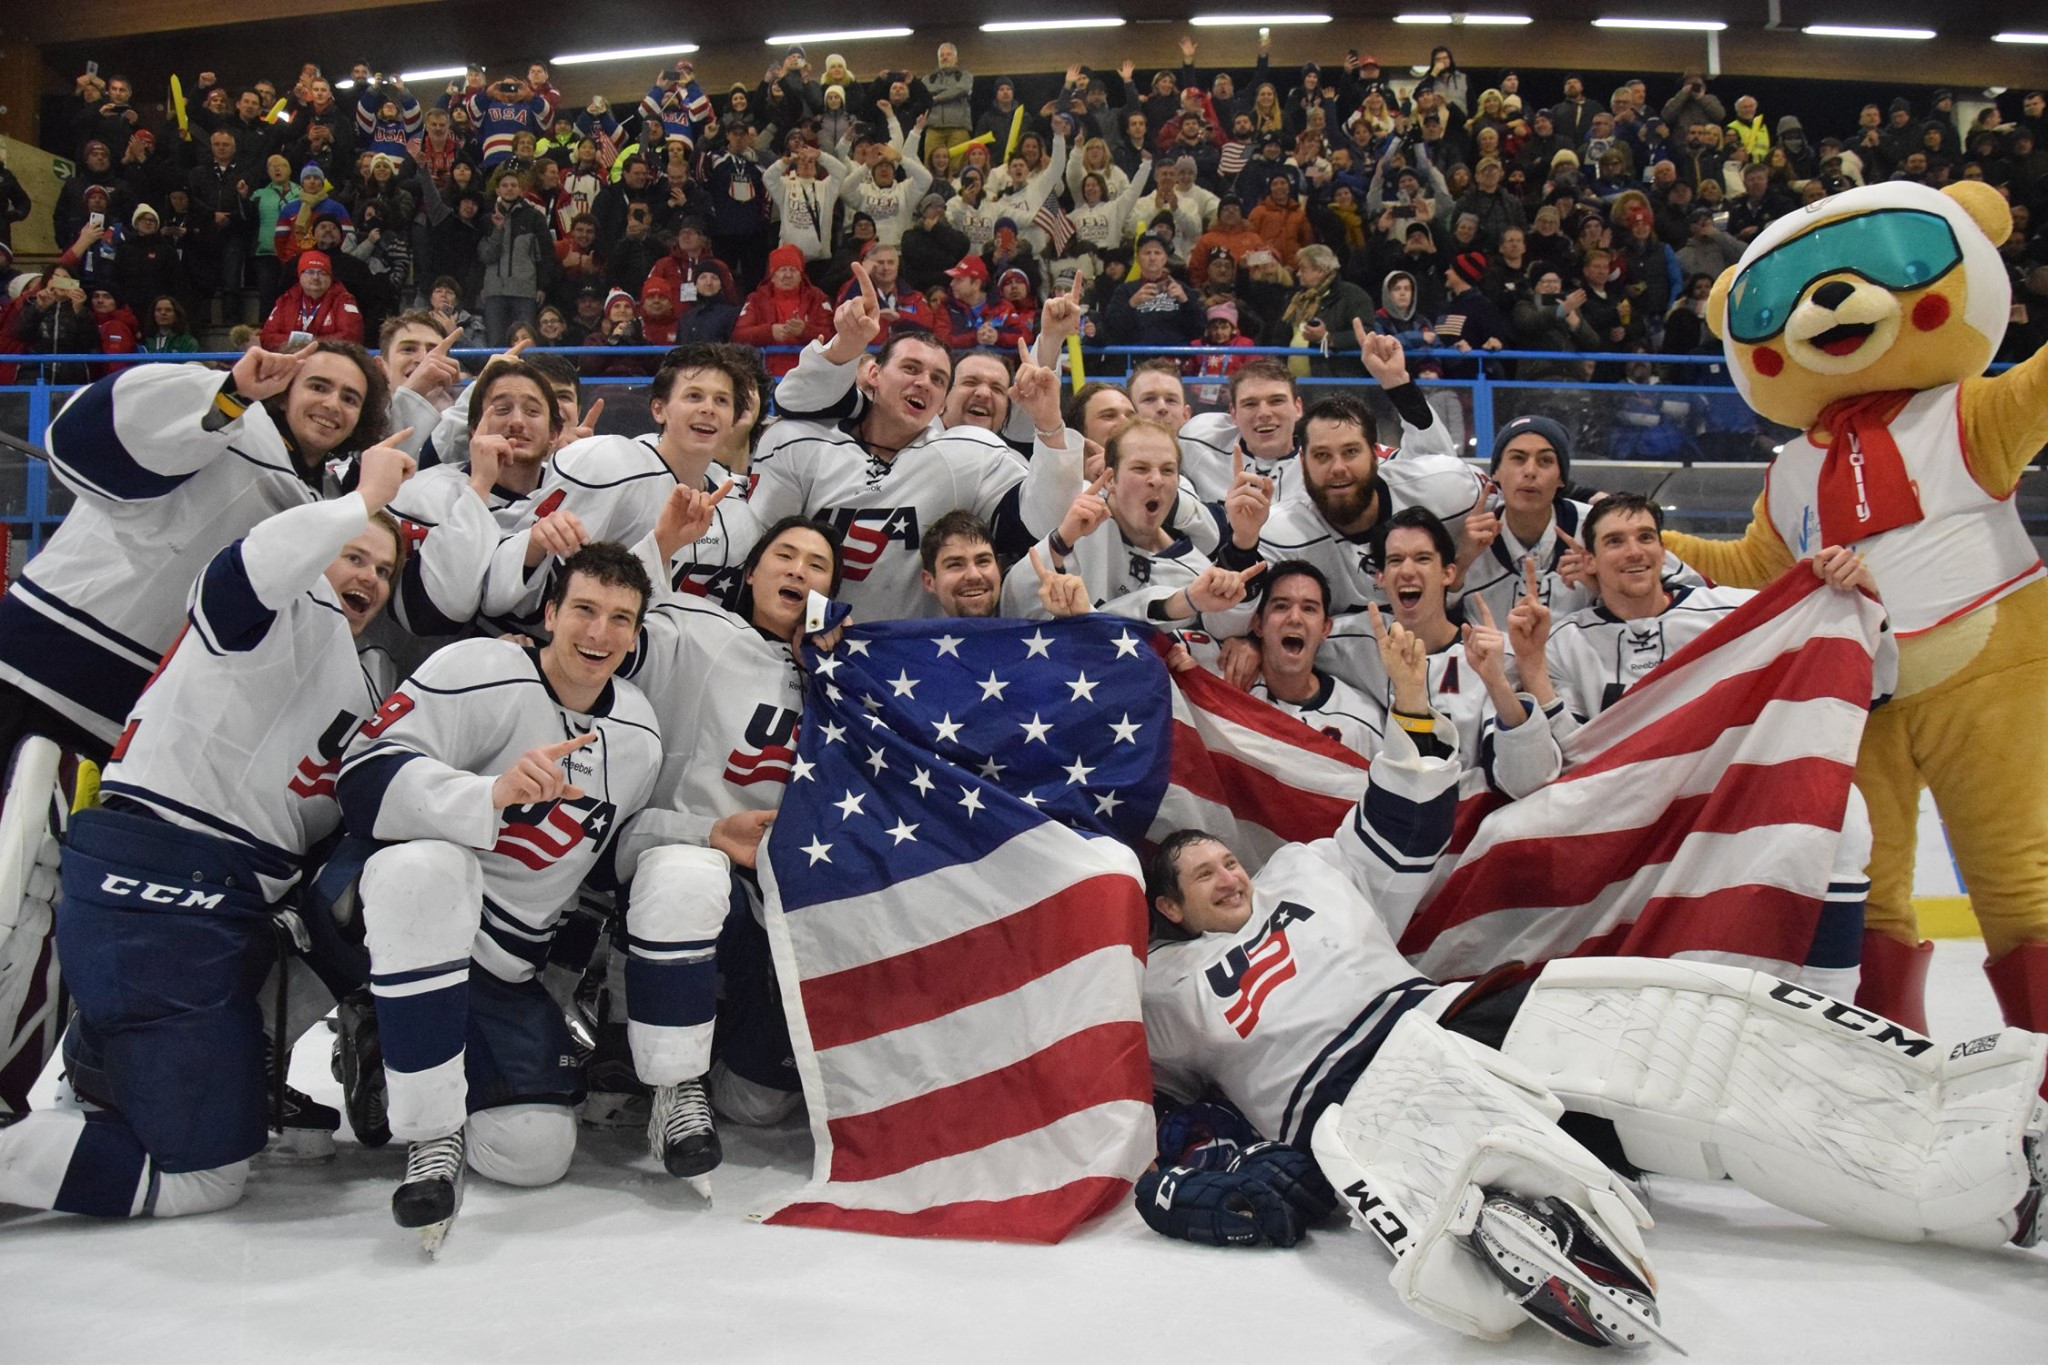 United States win ice hockey gold as Winter Deaflympics conclude